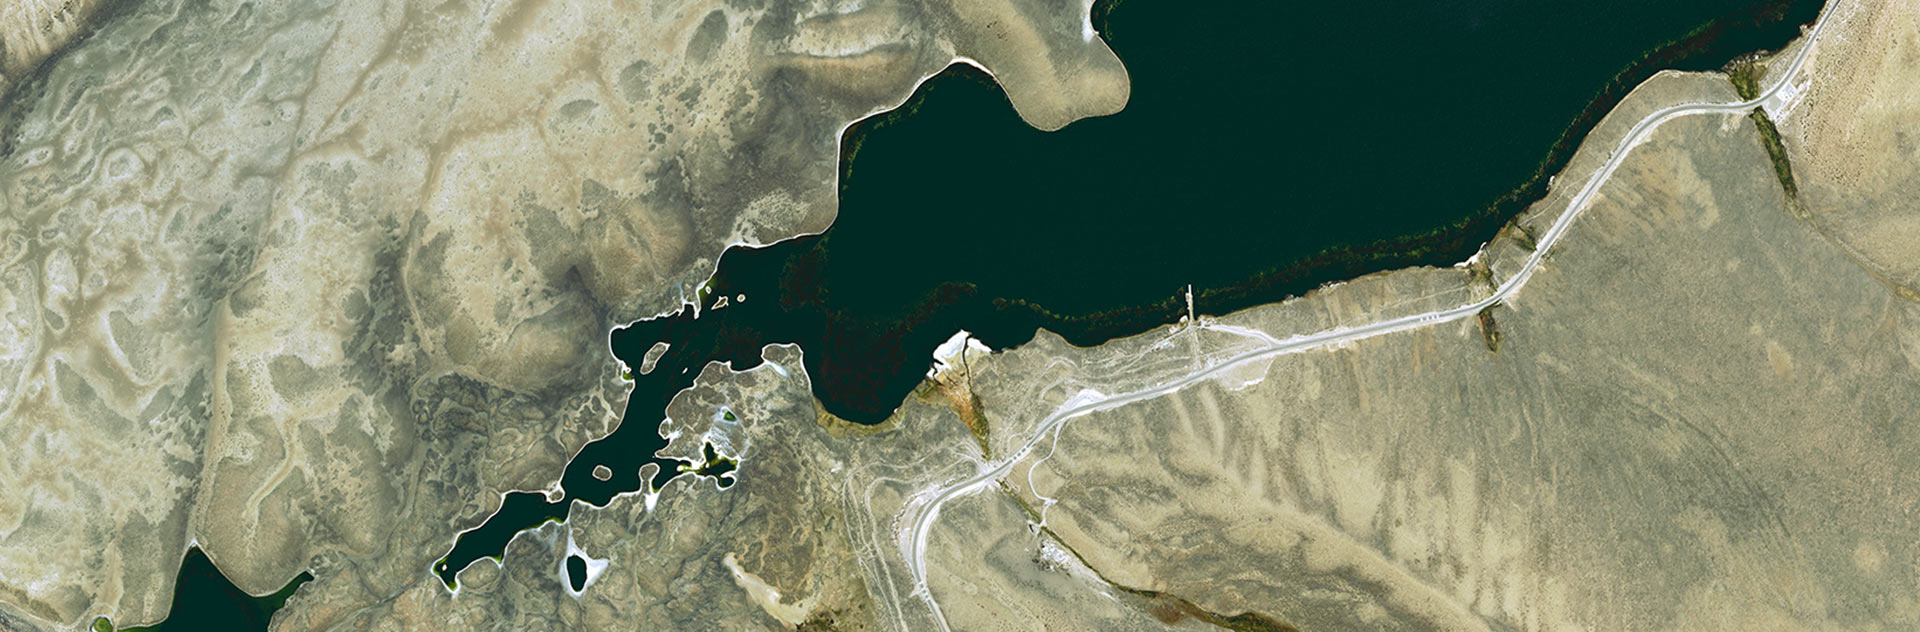 Chungará is a lake situated in the extreme north of Chile at an elevation of 4,517 m  in the Altiplano.